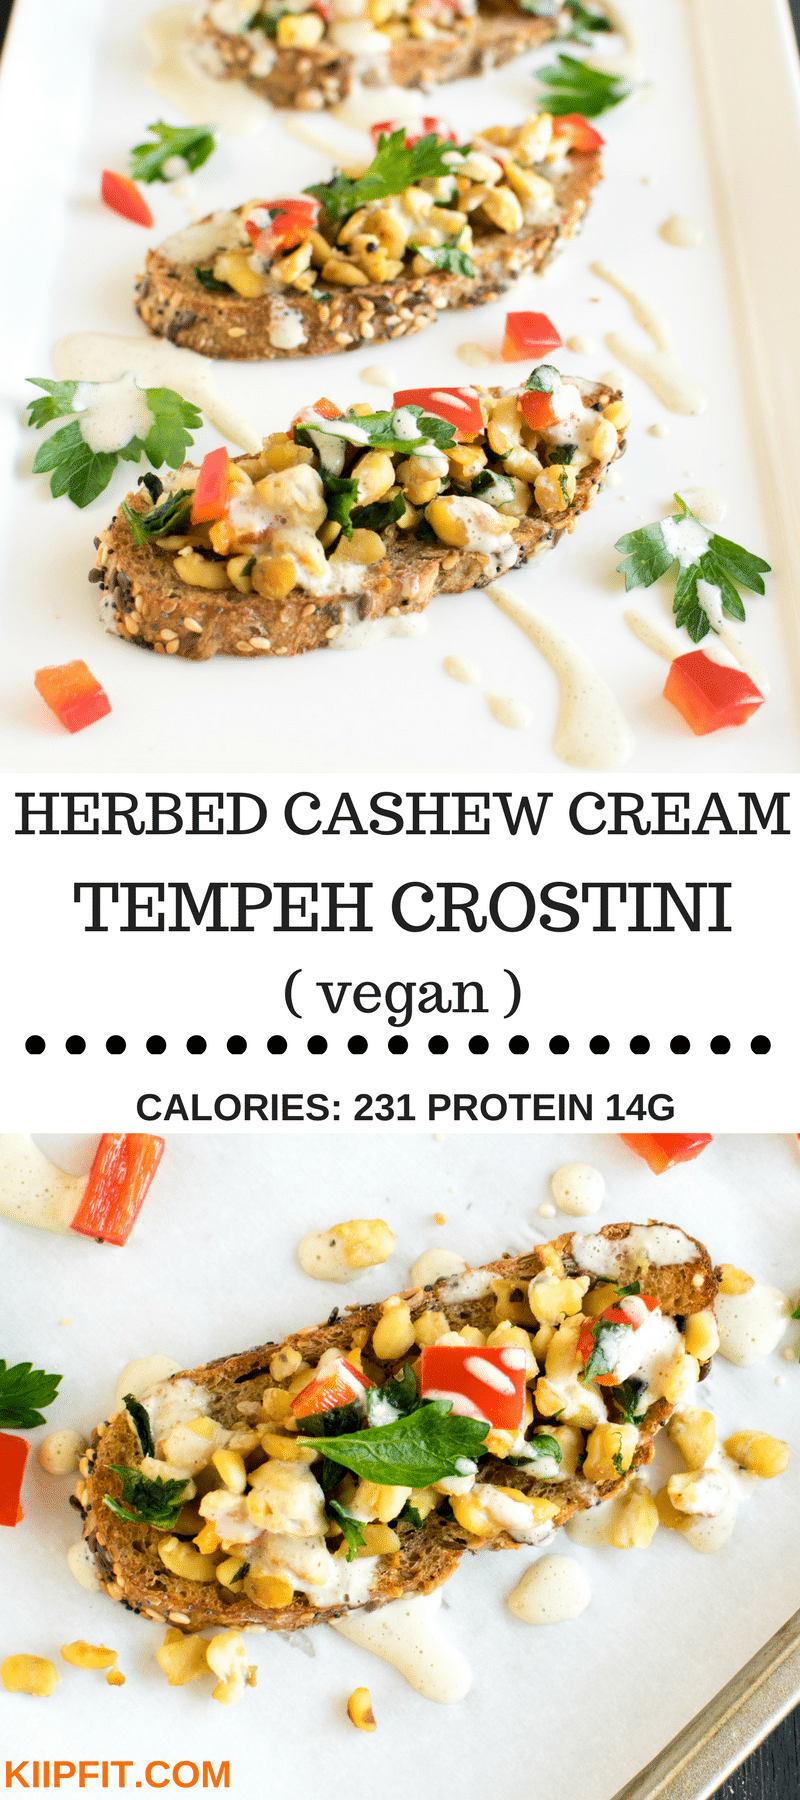 Herbed Cashew Cream Tempeh Crostini is not only healthy but is packed with flavor and outstanding taste. It’s very easy to make and is a perfect party appetizer. With Thanksgiving and Christmas approaching this appetizer is definitely a winner. The delicious blend of herbs along with raw cashew nuts drizzled over tempeh crostini is to die for [ vegan ] kiipfit.com